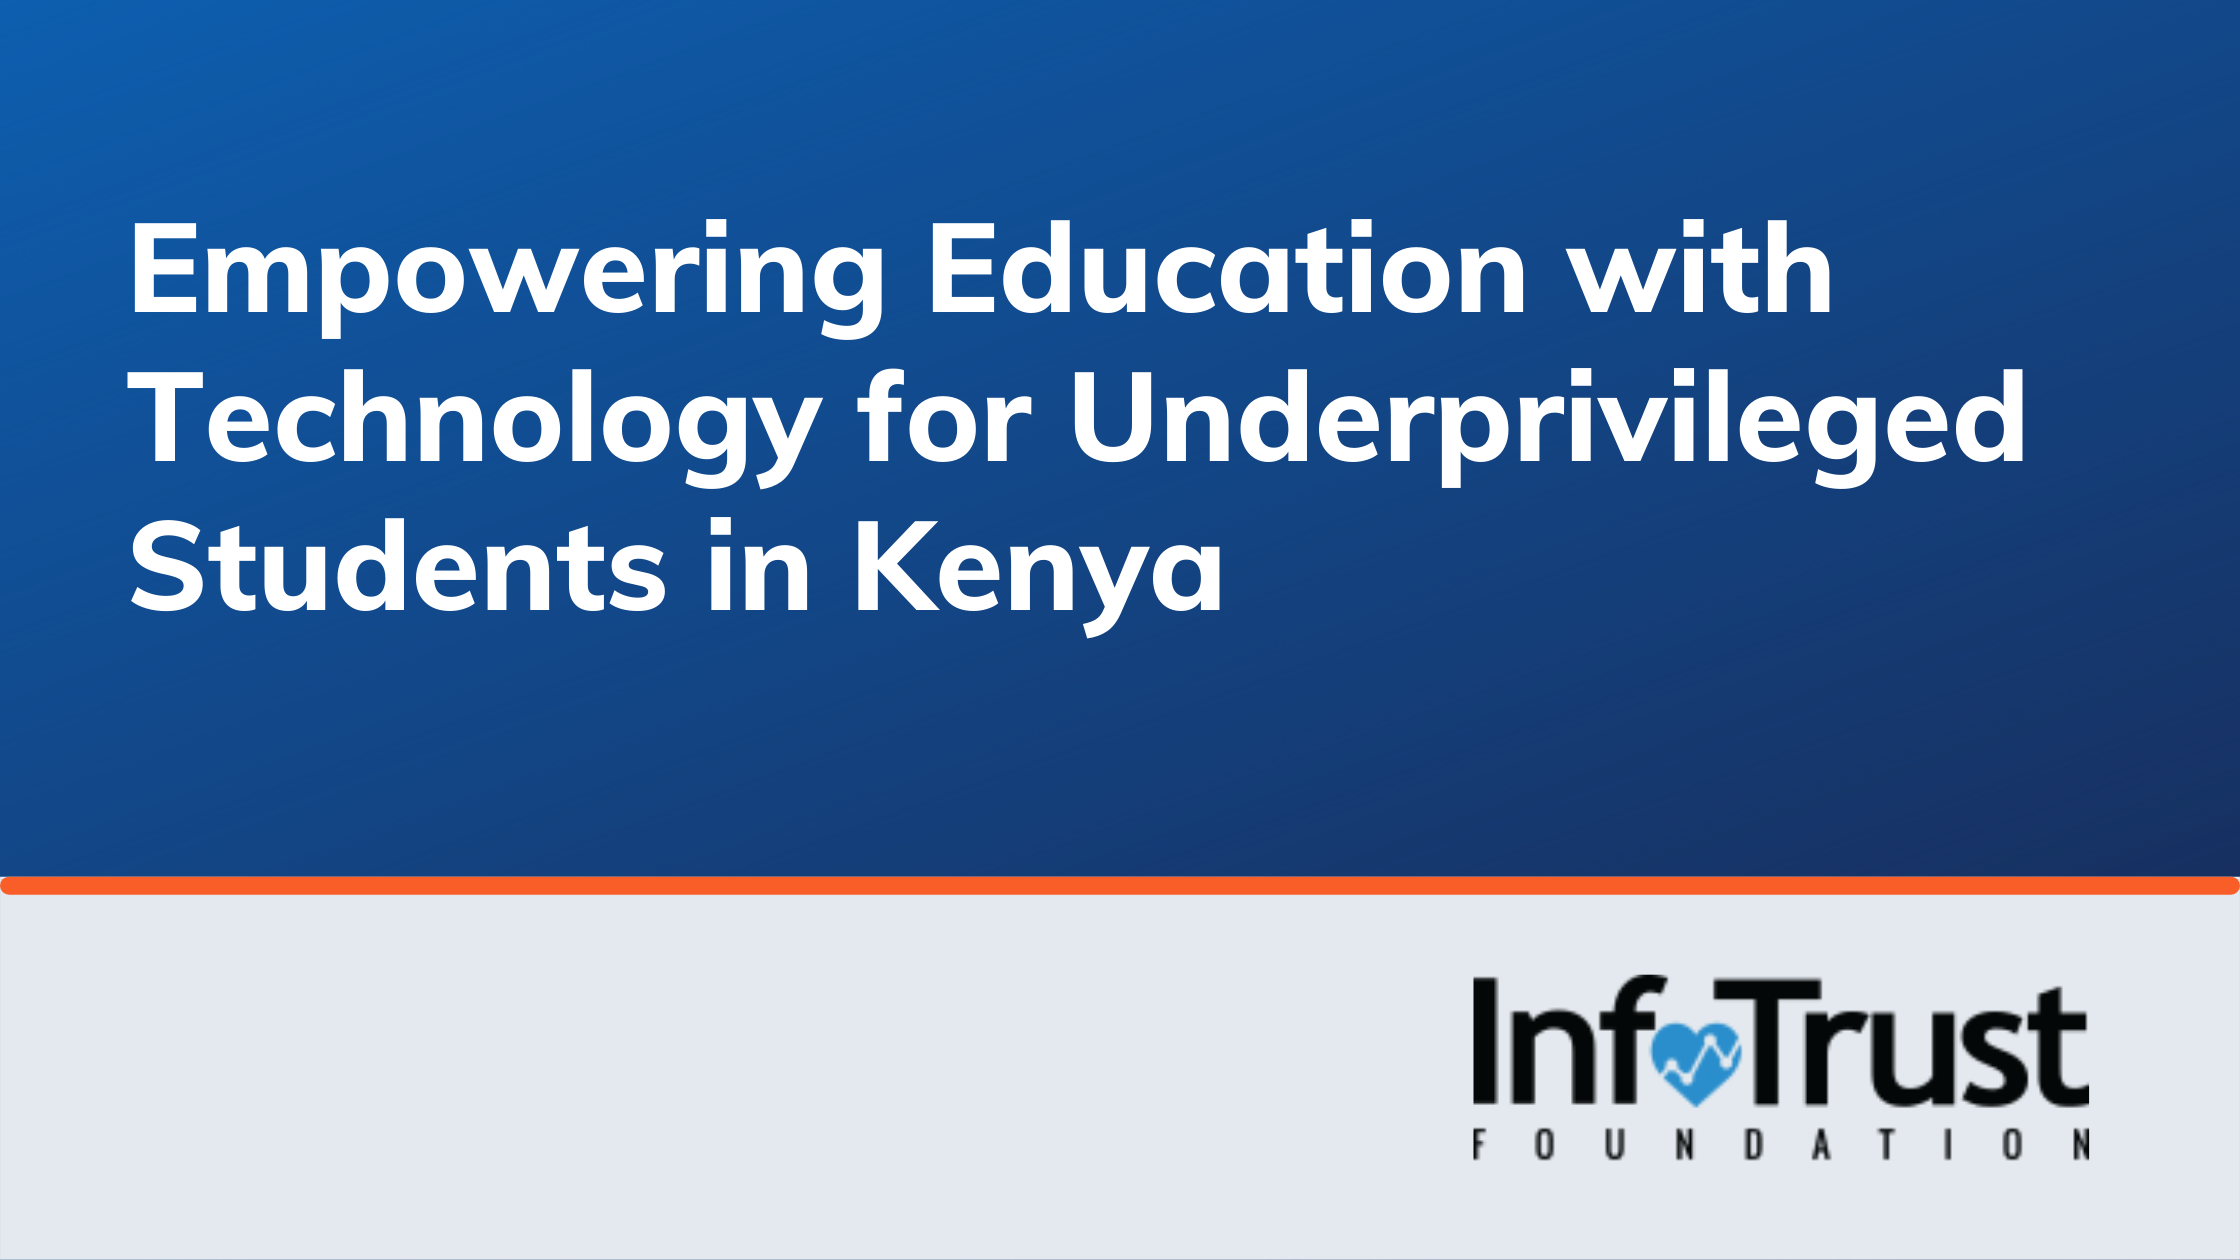 Empowering Education with Technology for Underprivileged Students in Kenya